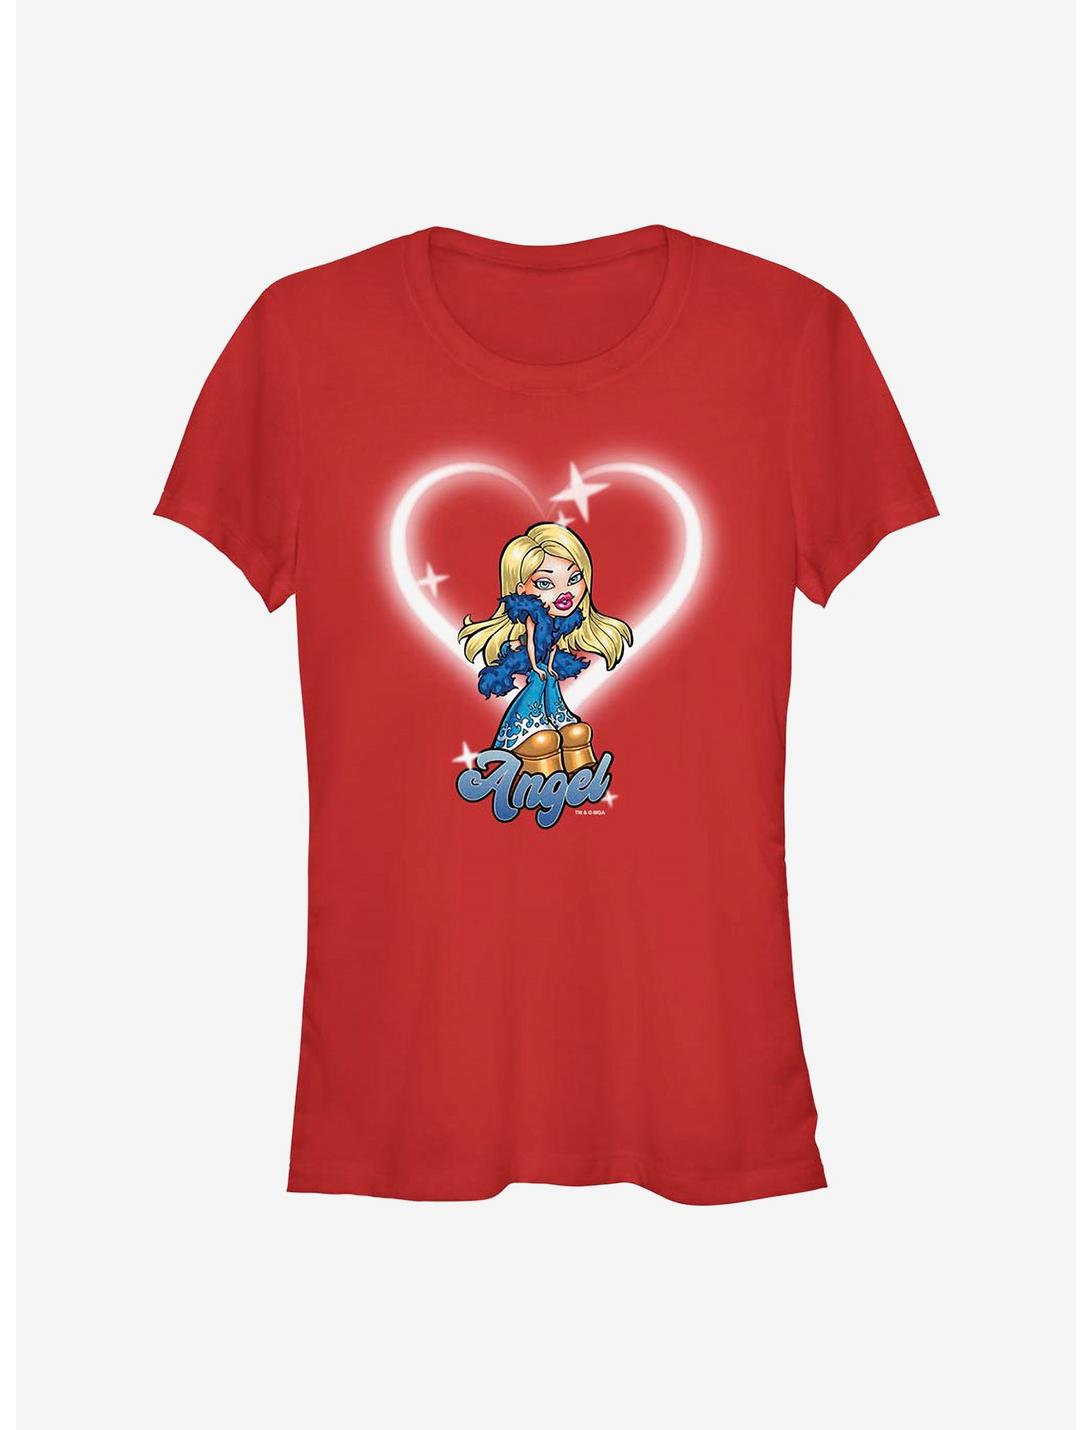 Bratz Angel Outfit Of The Day Girls T-Shirt, RED, hi-res